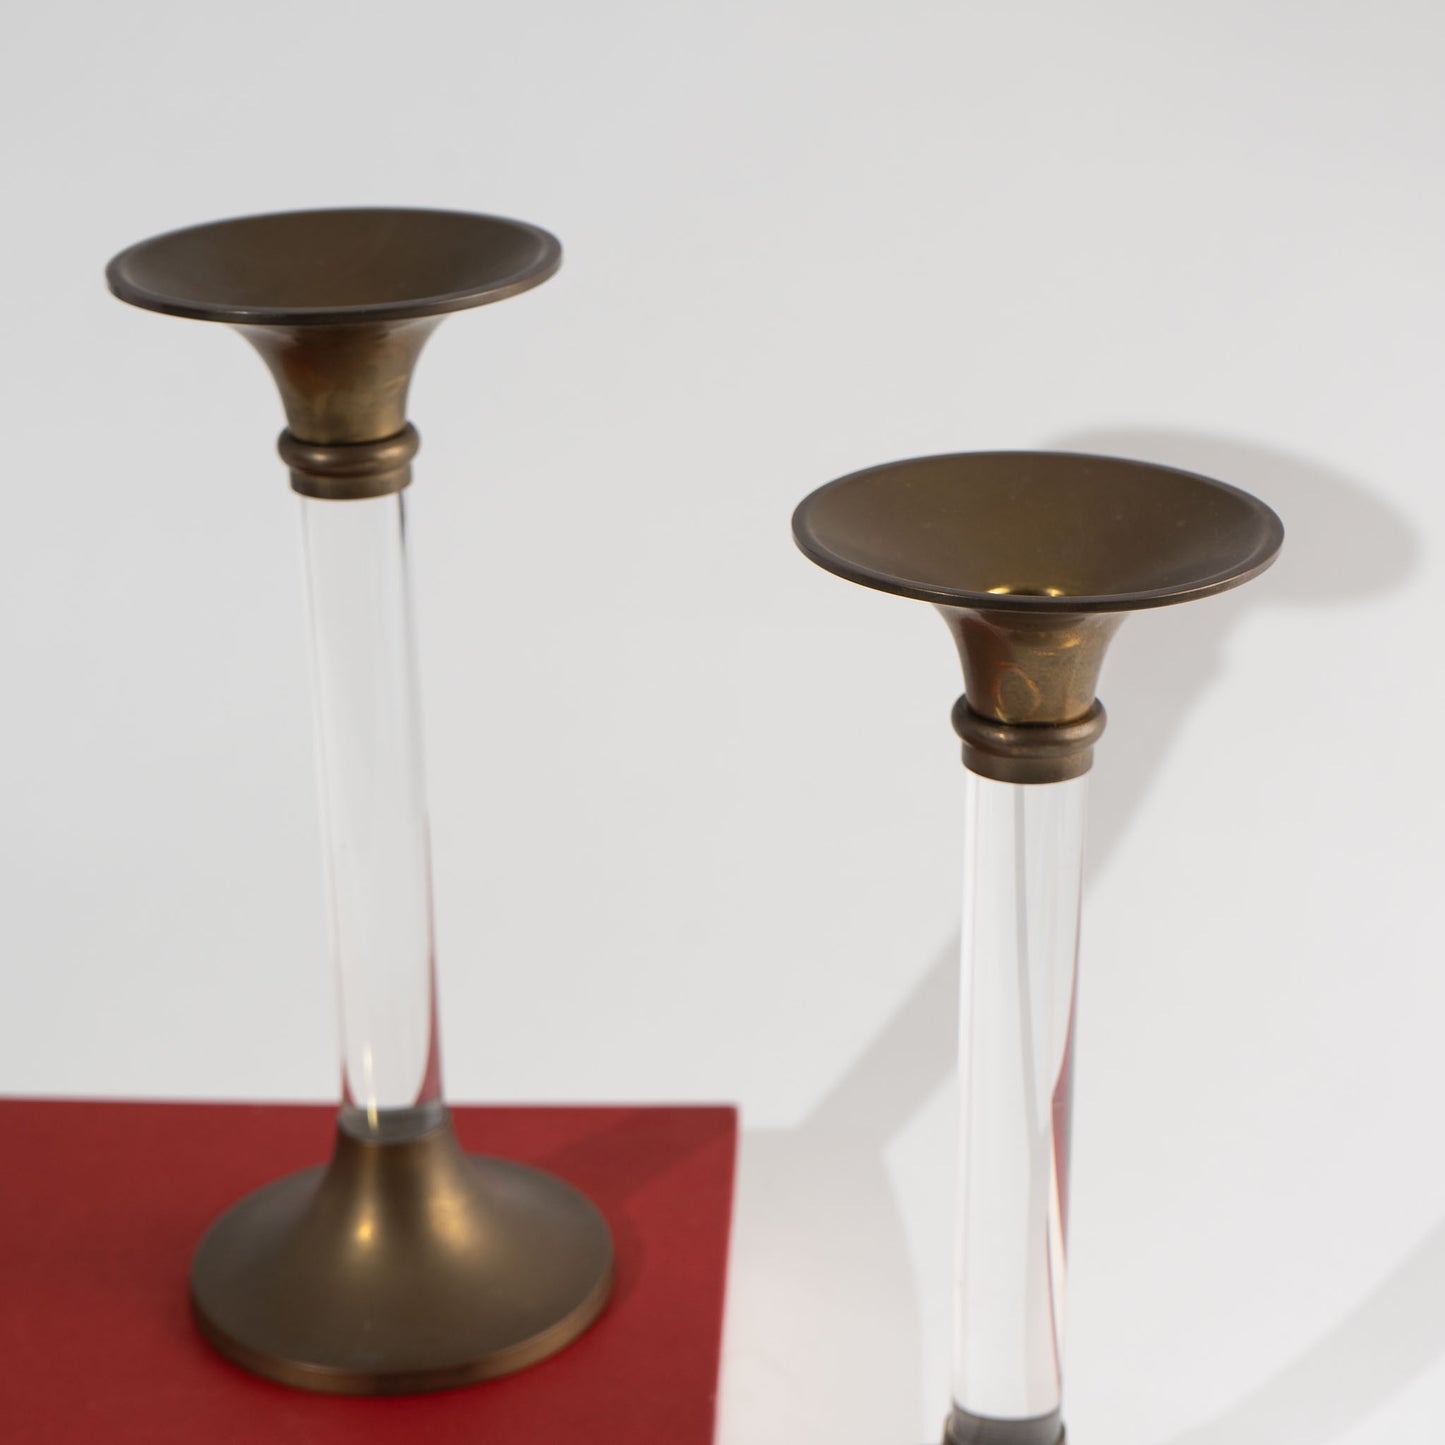 Load image into Gallery viewer, Vintage Lucite and Brass Candlestick Holders - A Pair
